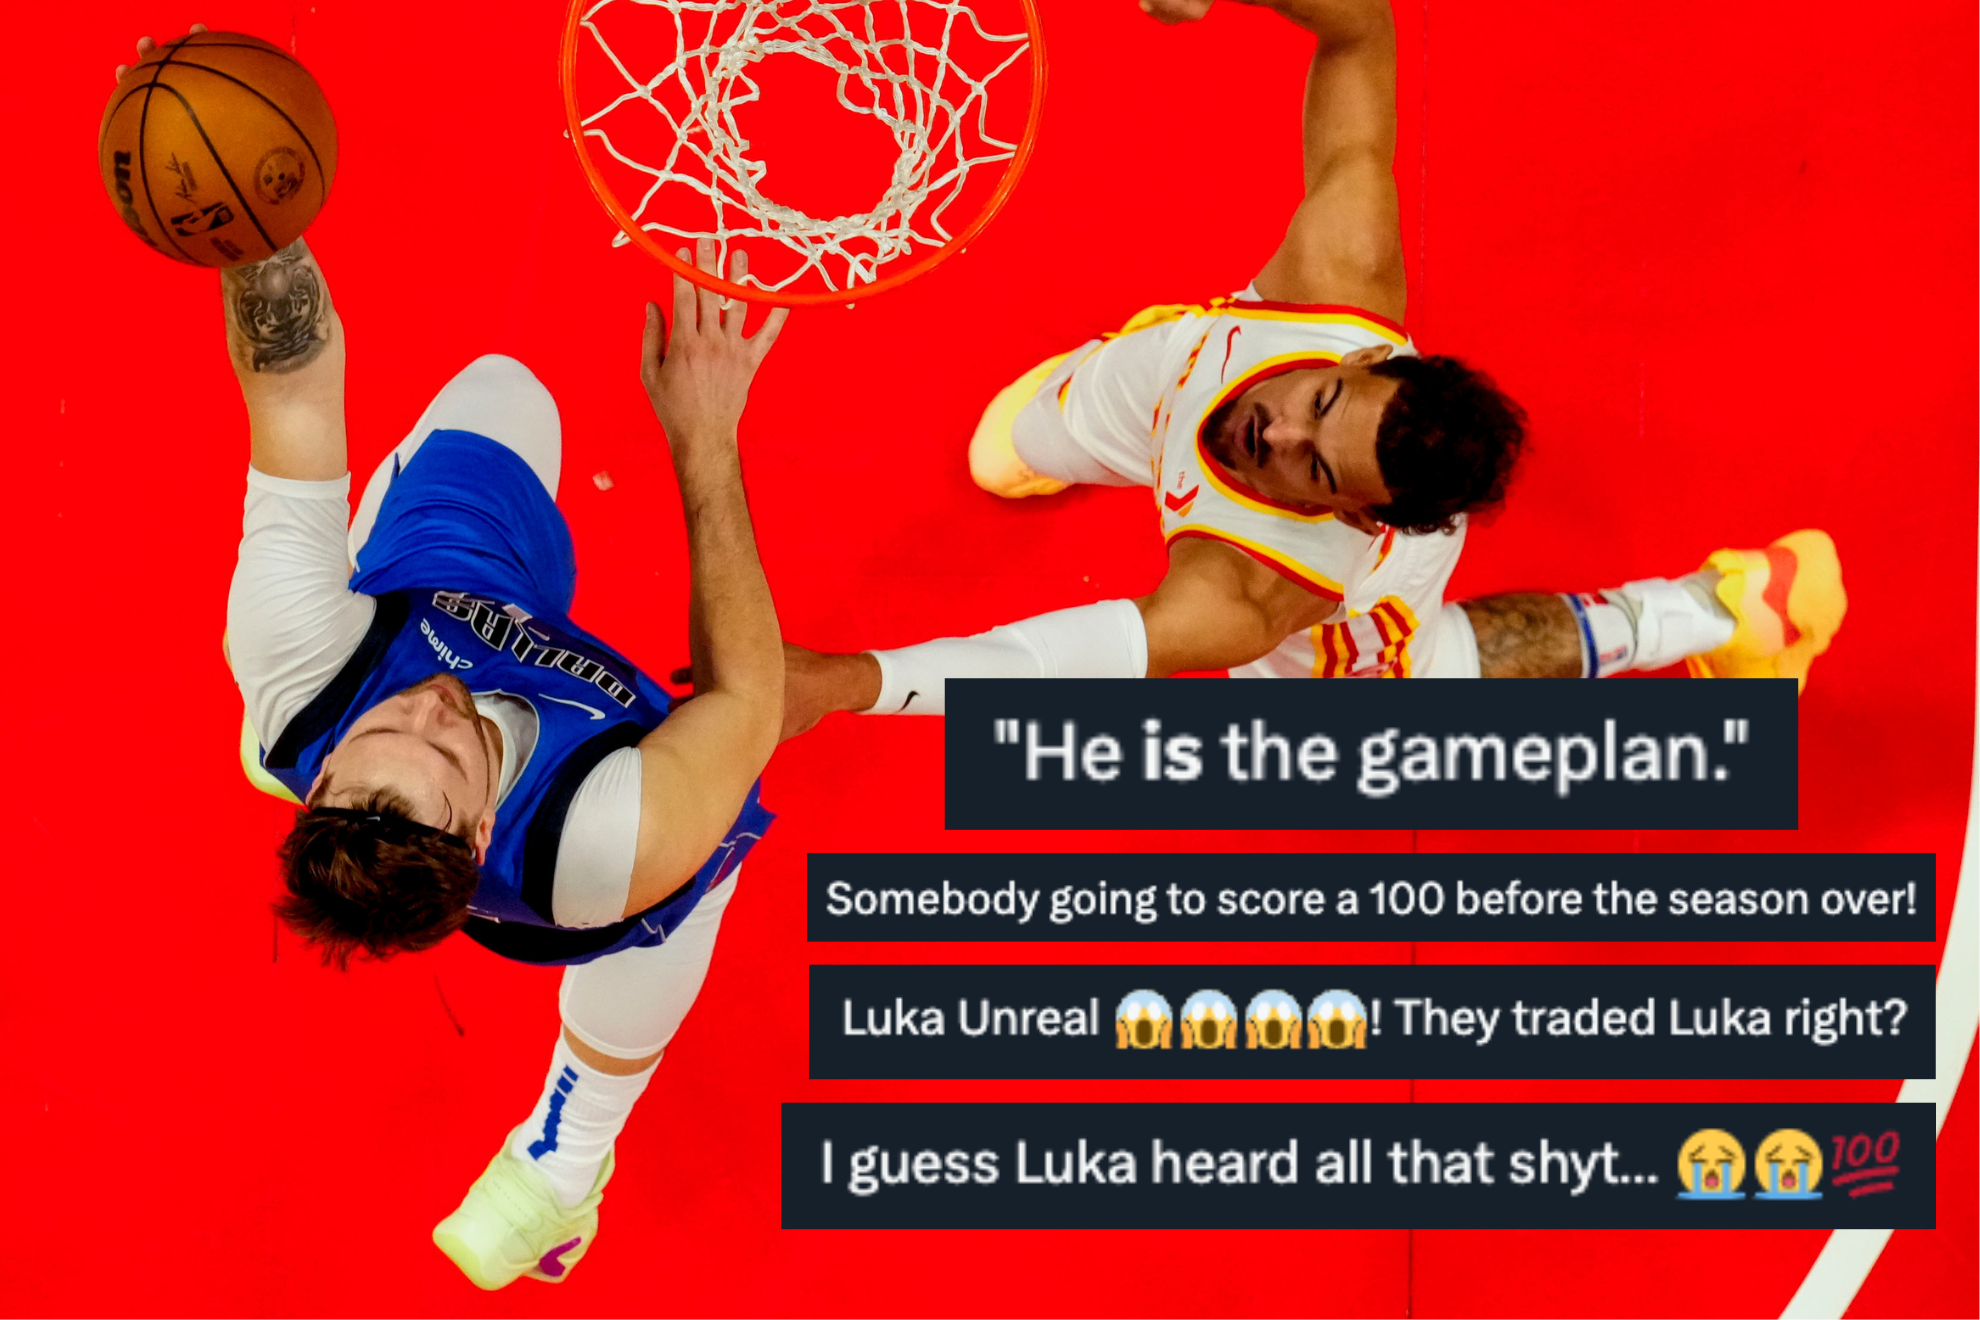 Luka Doncic went crazy on Friday night against the Atlanta Hawks.